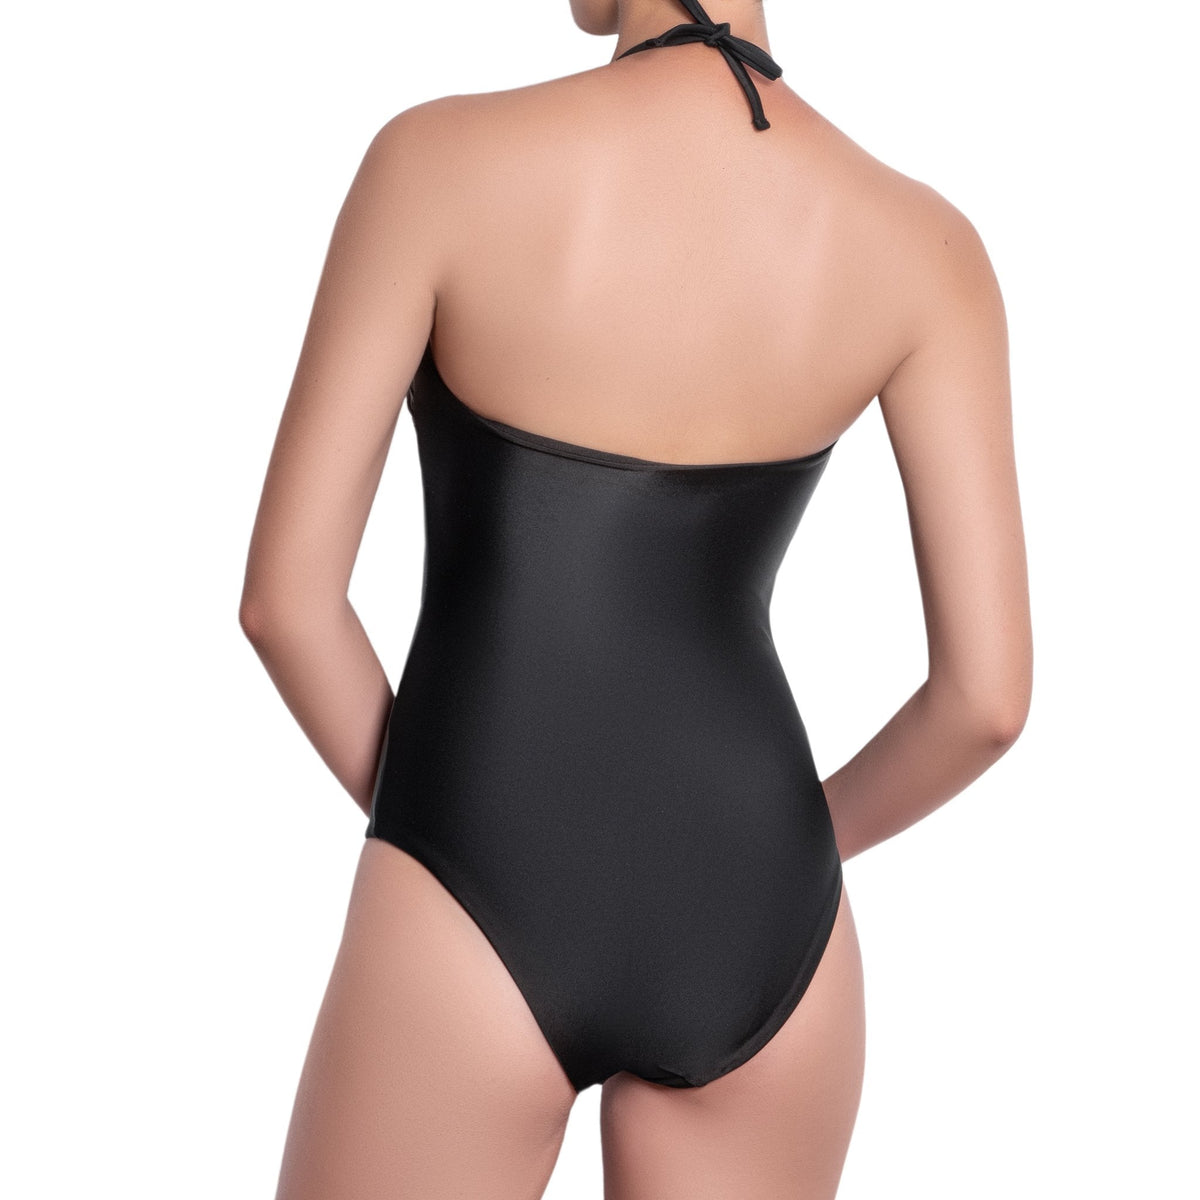 ISABELLE high neck one piece, bronze brocade panel black swimsuit by ALMA swimwear ‚Äì back view 